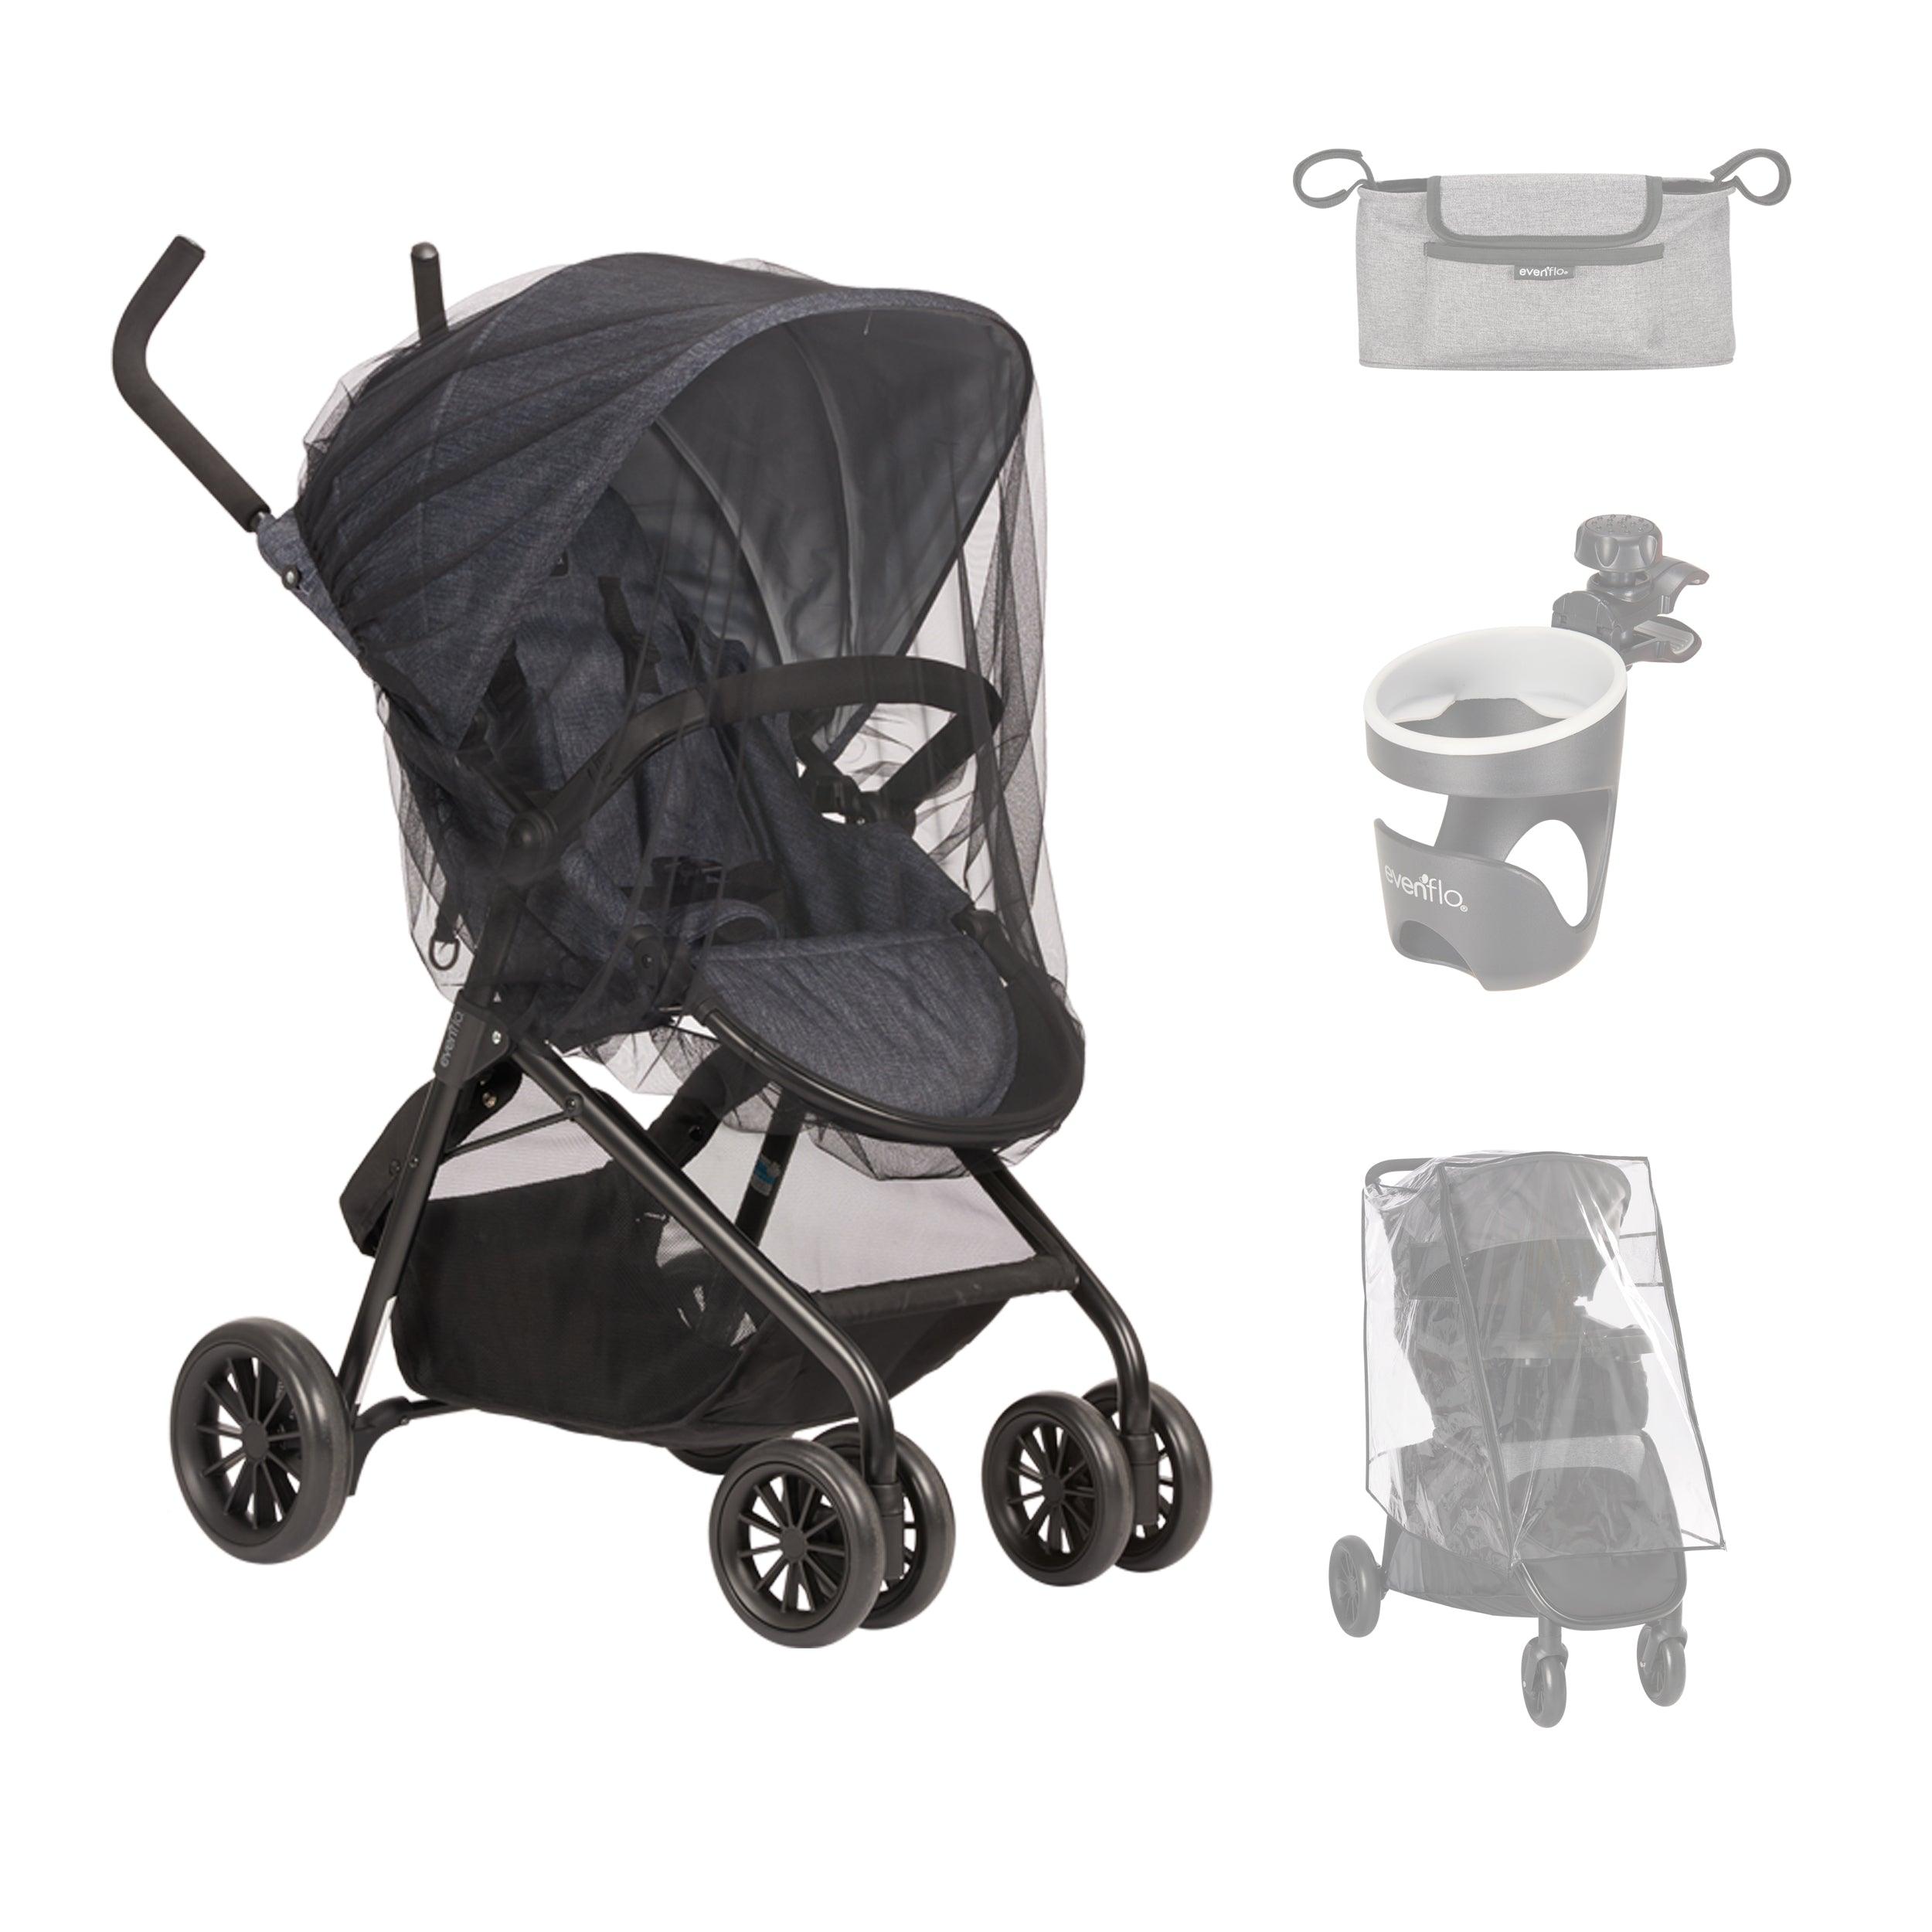 Stroller Four-Piece Accessory Starter Kit - MacroBaby